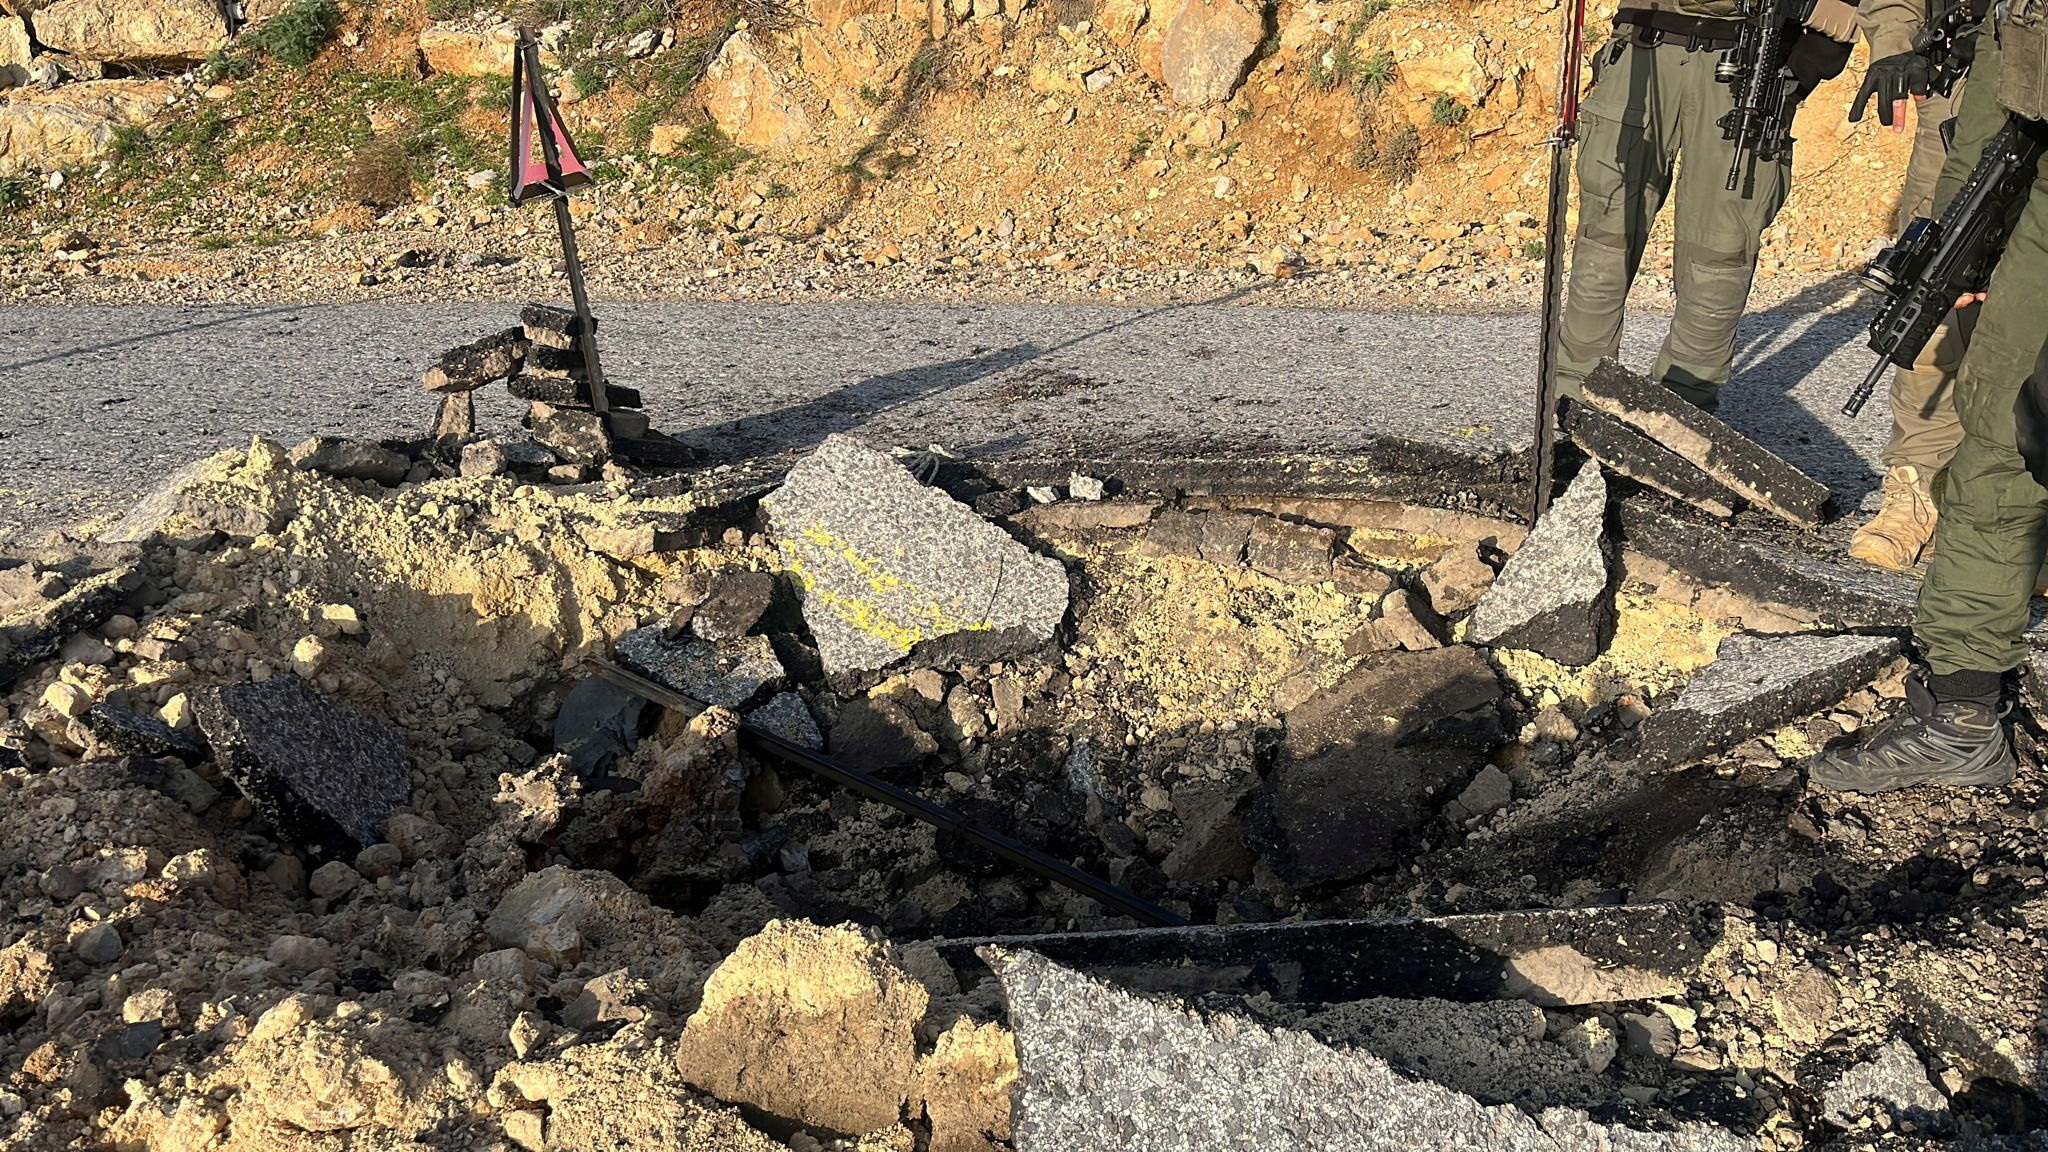 A view of a crater on a damaged road at a location given as Hermon area